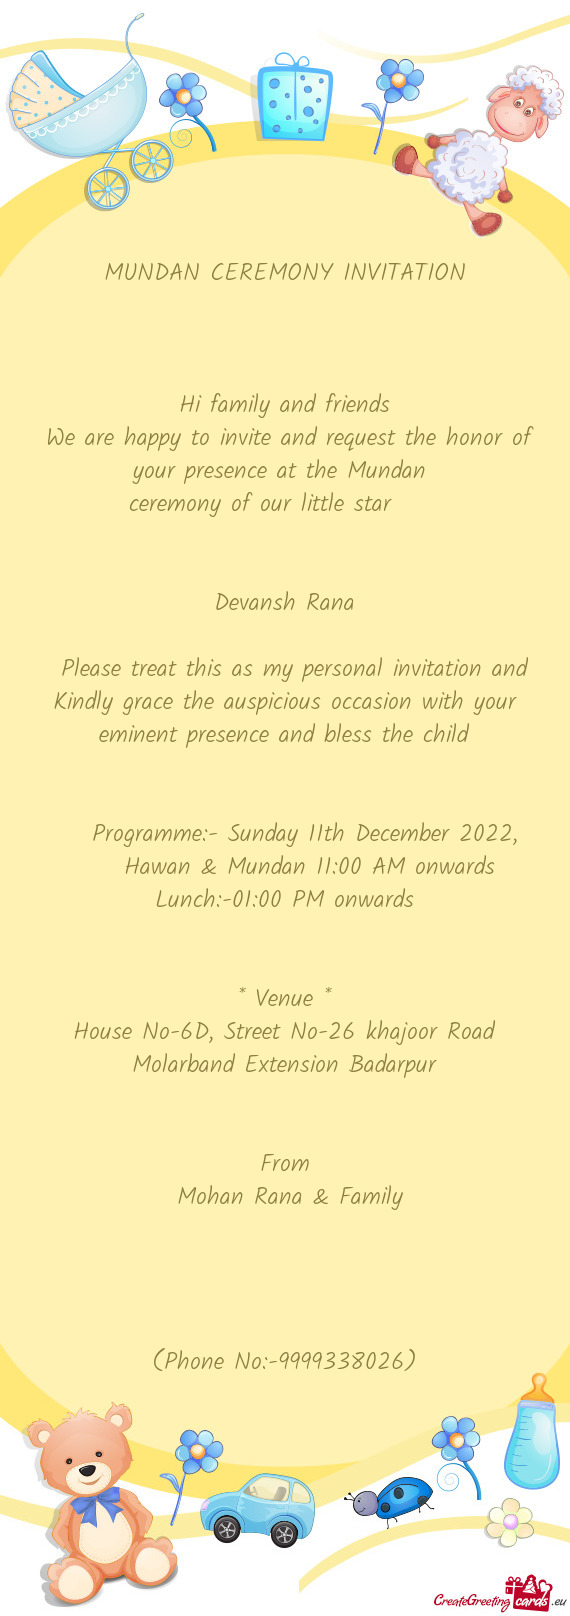 We are happy to invite and request the honor of your presence at the Mundan